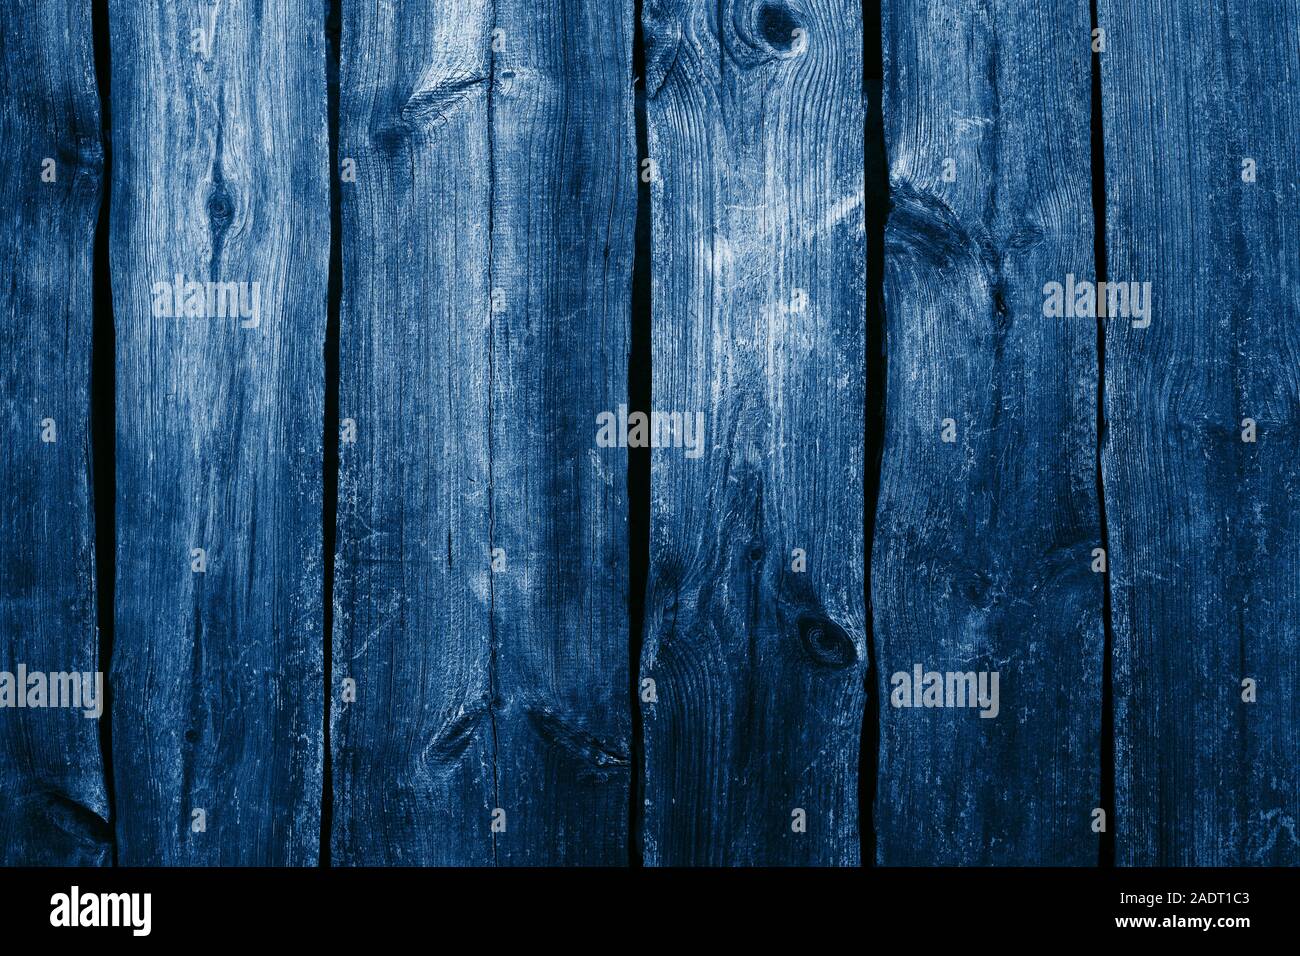 Texture of blue wooden painted planks, old wooden fence. Stock Photo